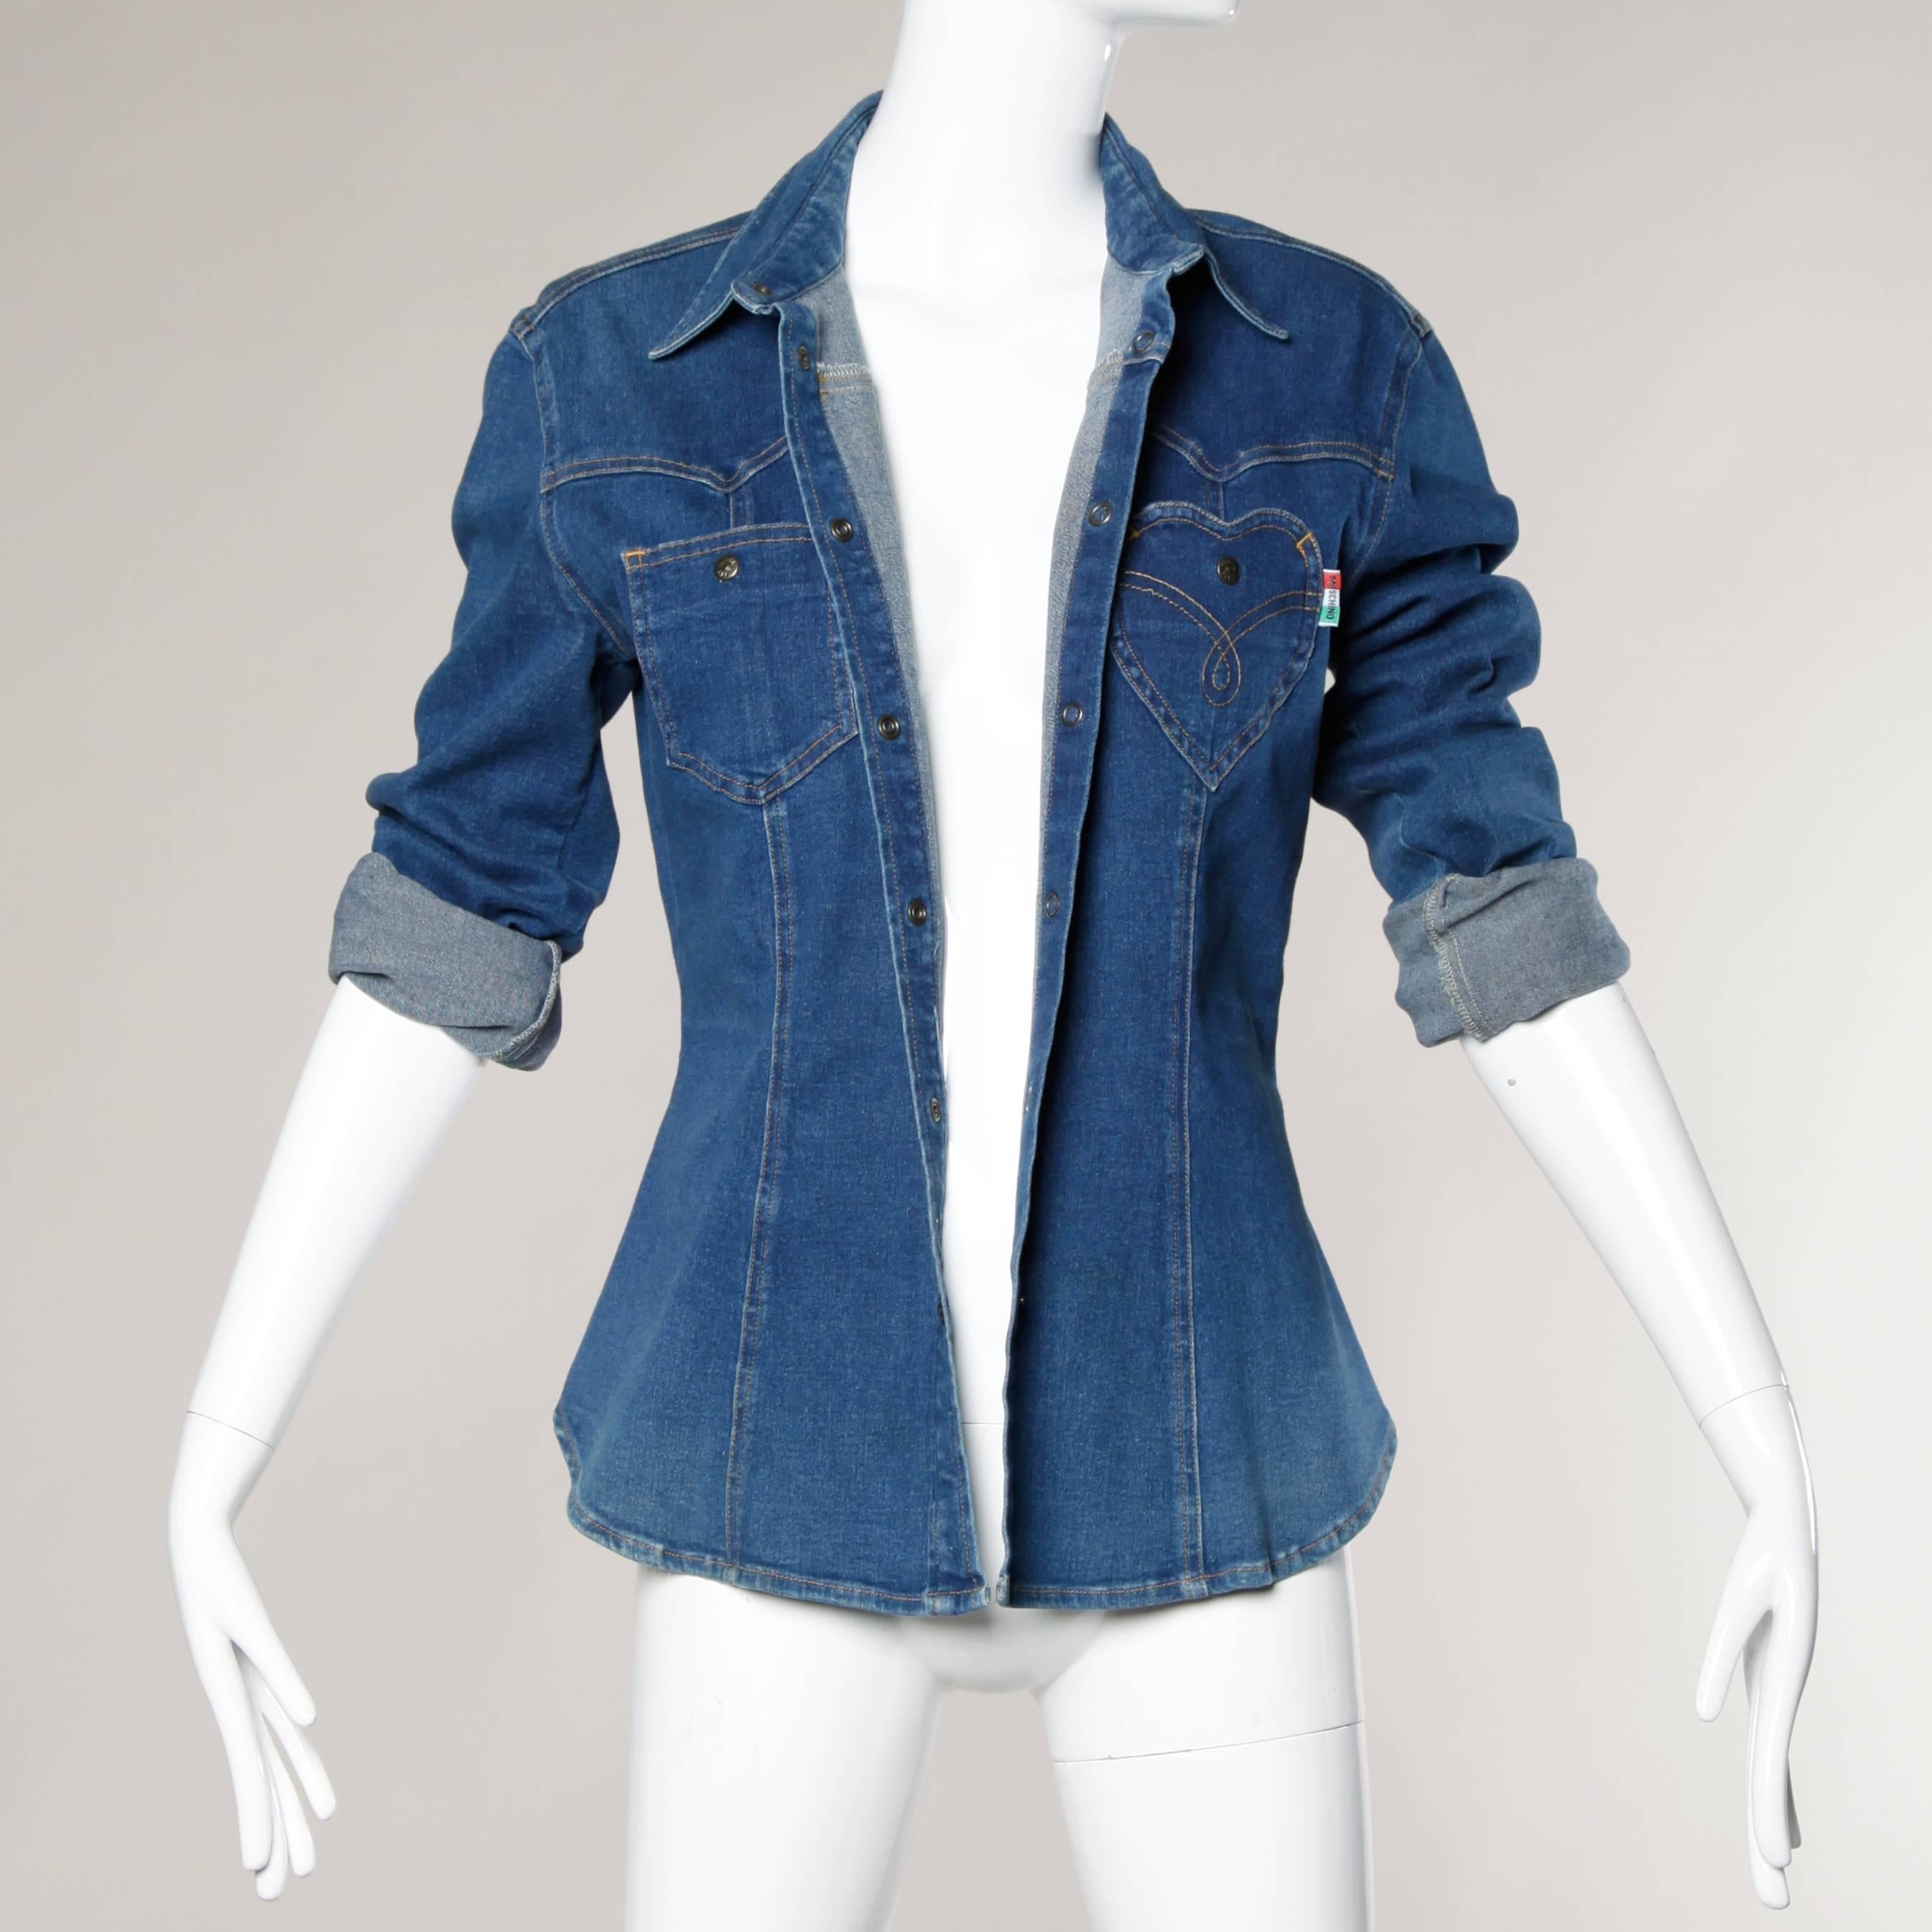 Women's 1990s Moschino Jeans Vintage Denim Heart Pocket Button Up Top, Shirt or Jacket